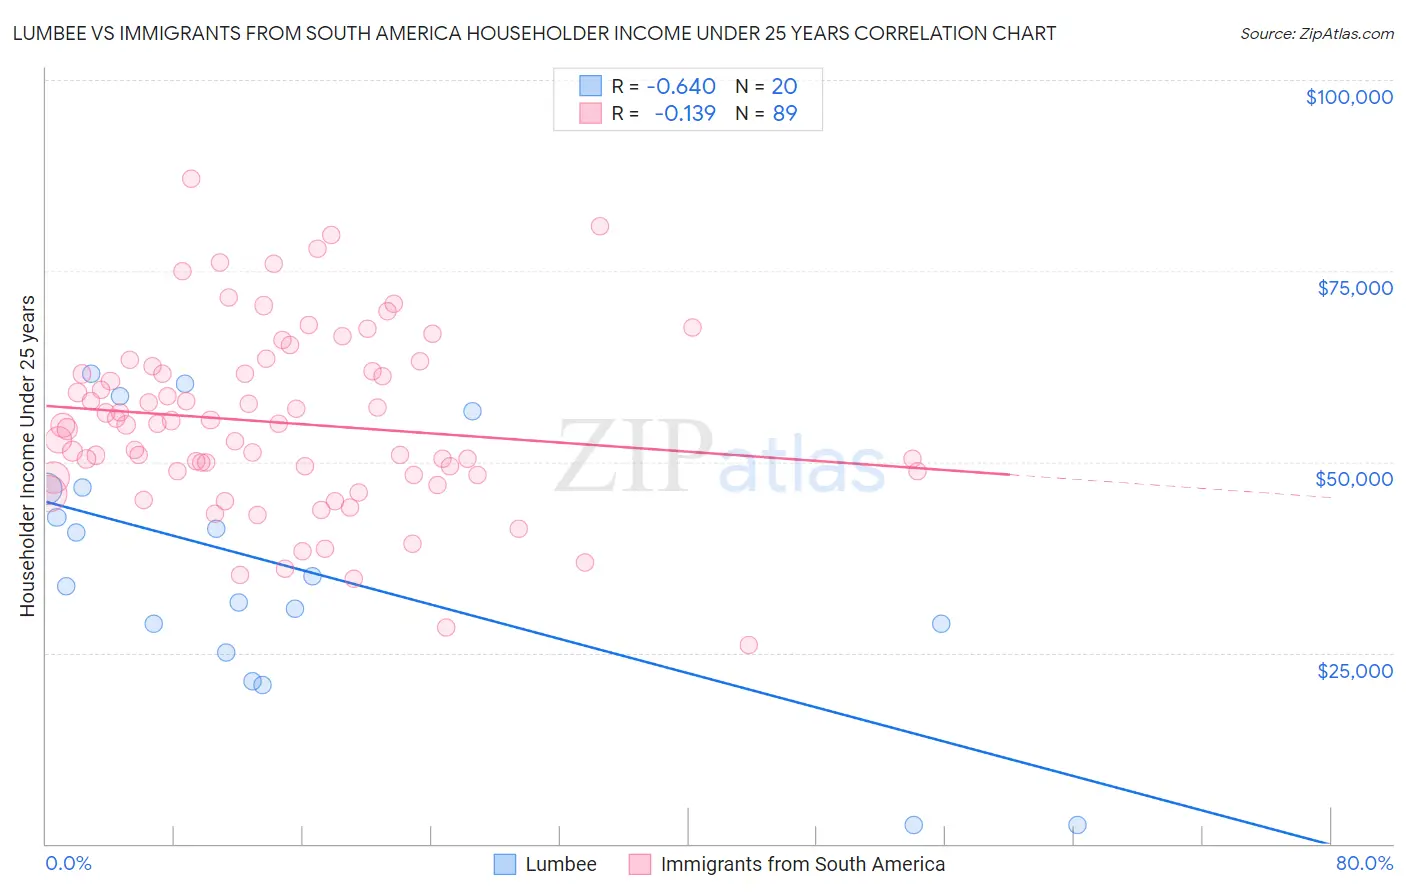 Lumbee vs Immigrants from South America Householder Income Under 25 years